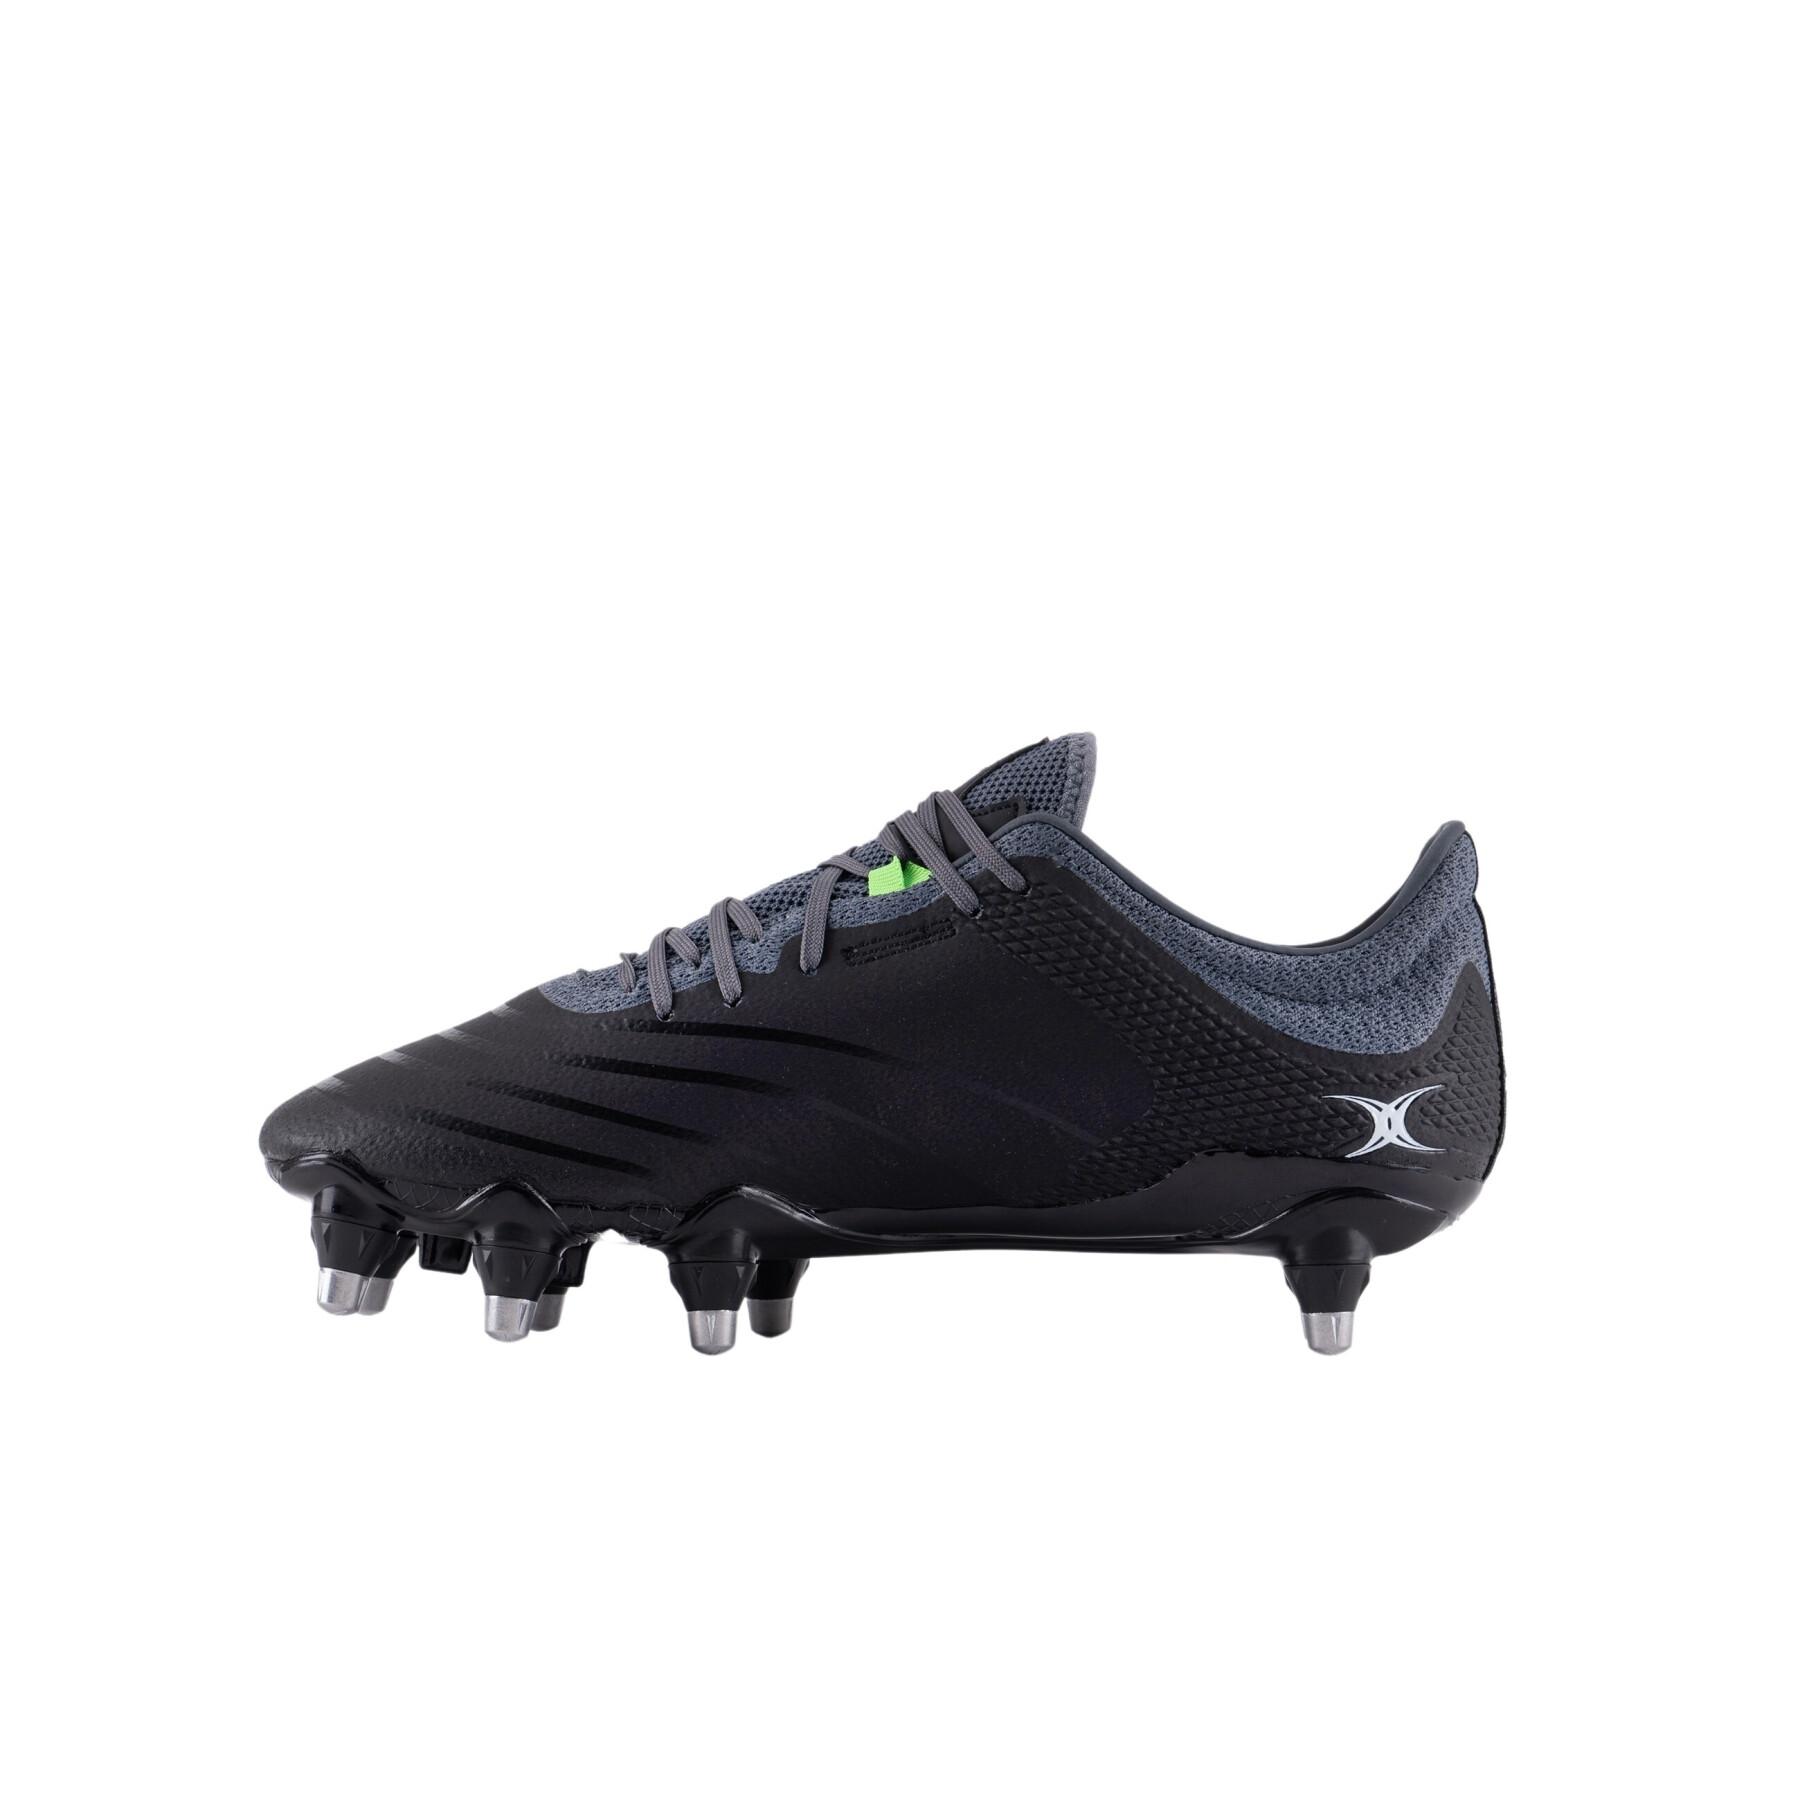 Sapatos de Rugby Gilbert Kinetica Pro Pwr 8S